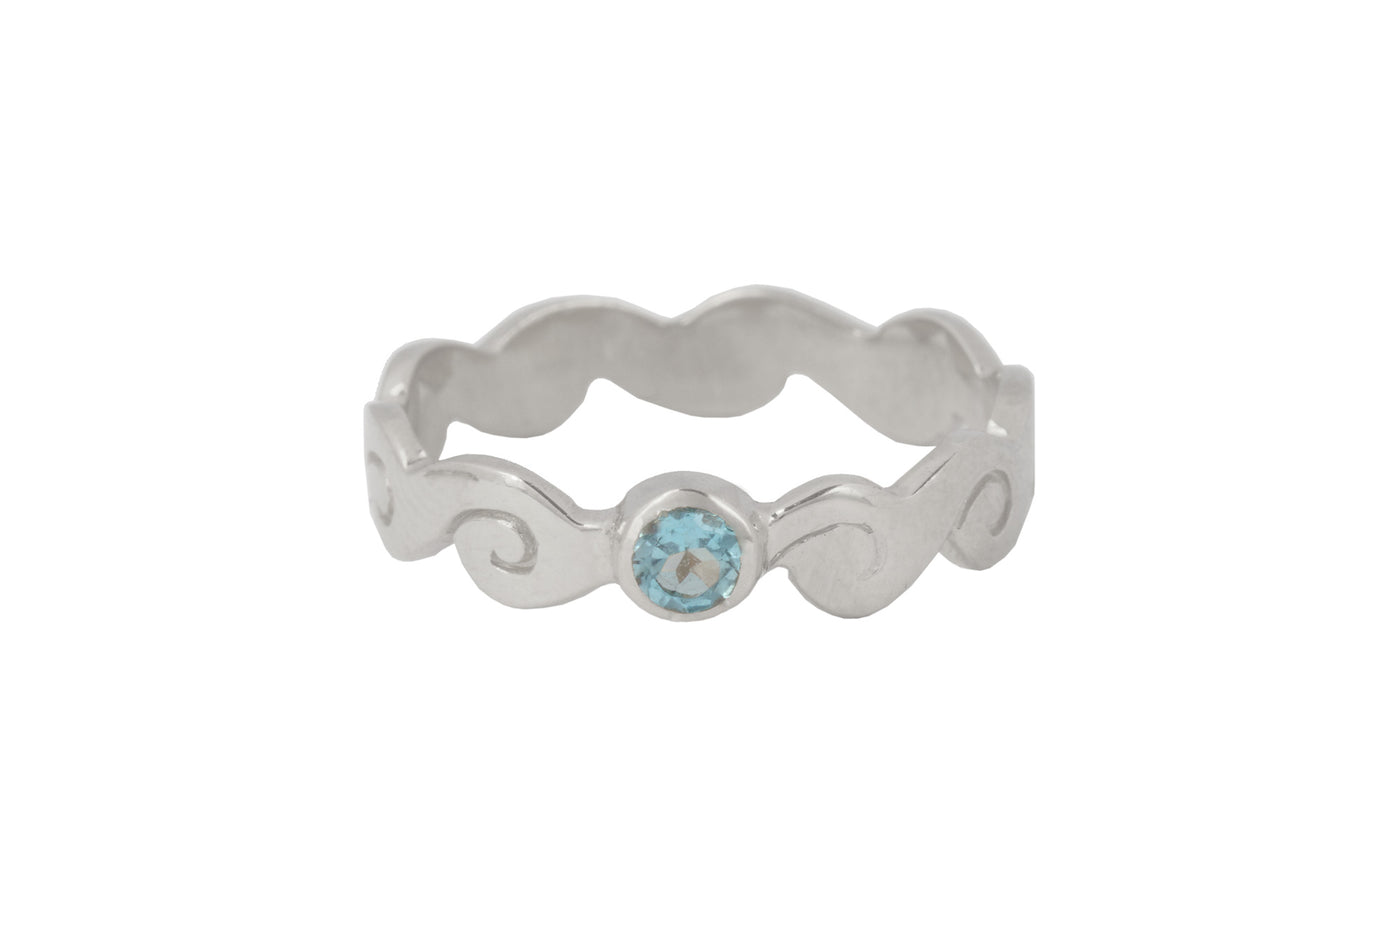 Ring with elements - Water. Silver,  blue topaz